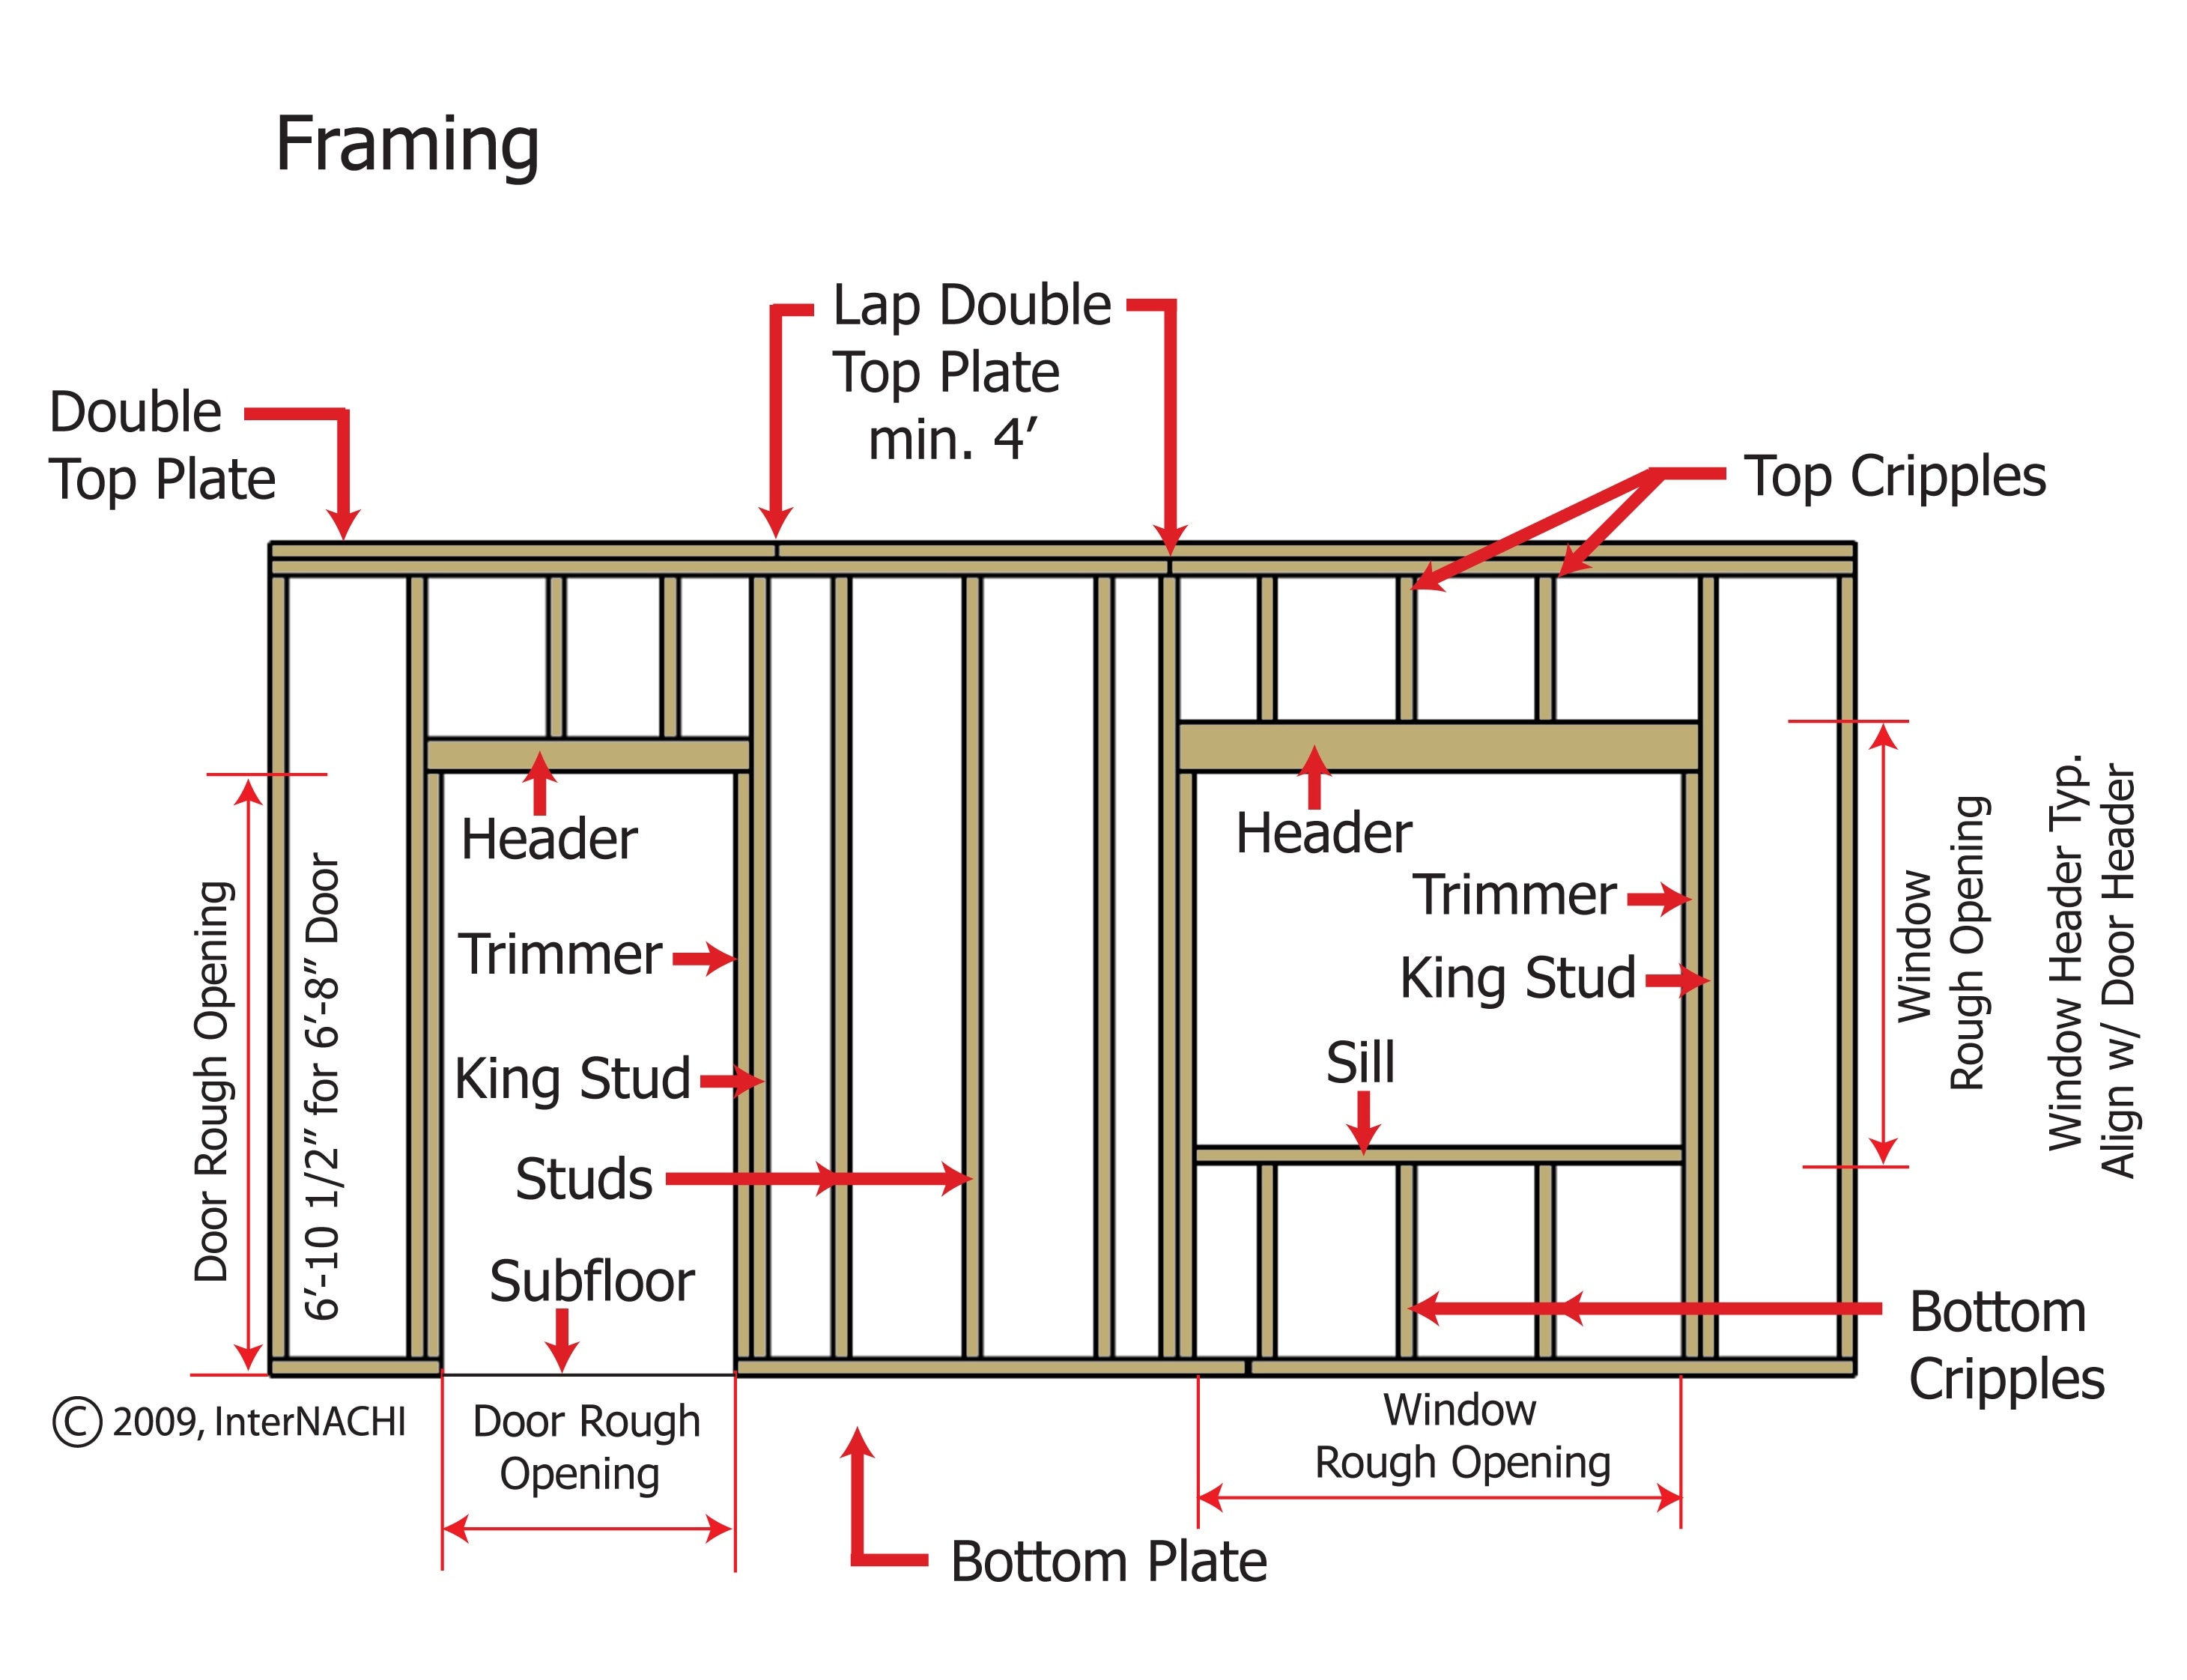 Framing Systems and Components